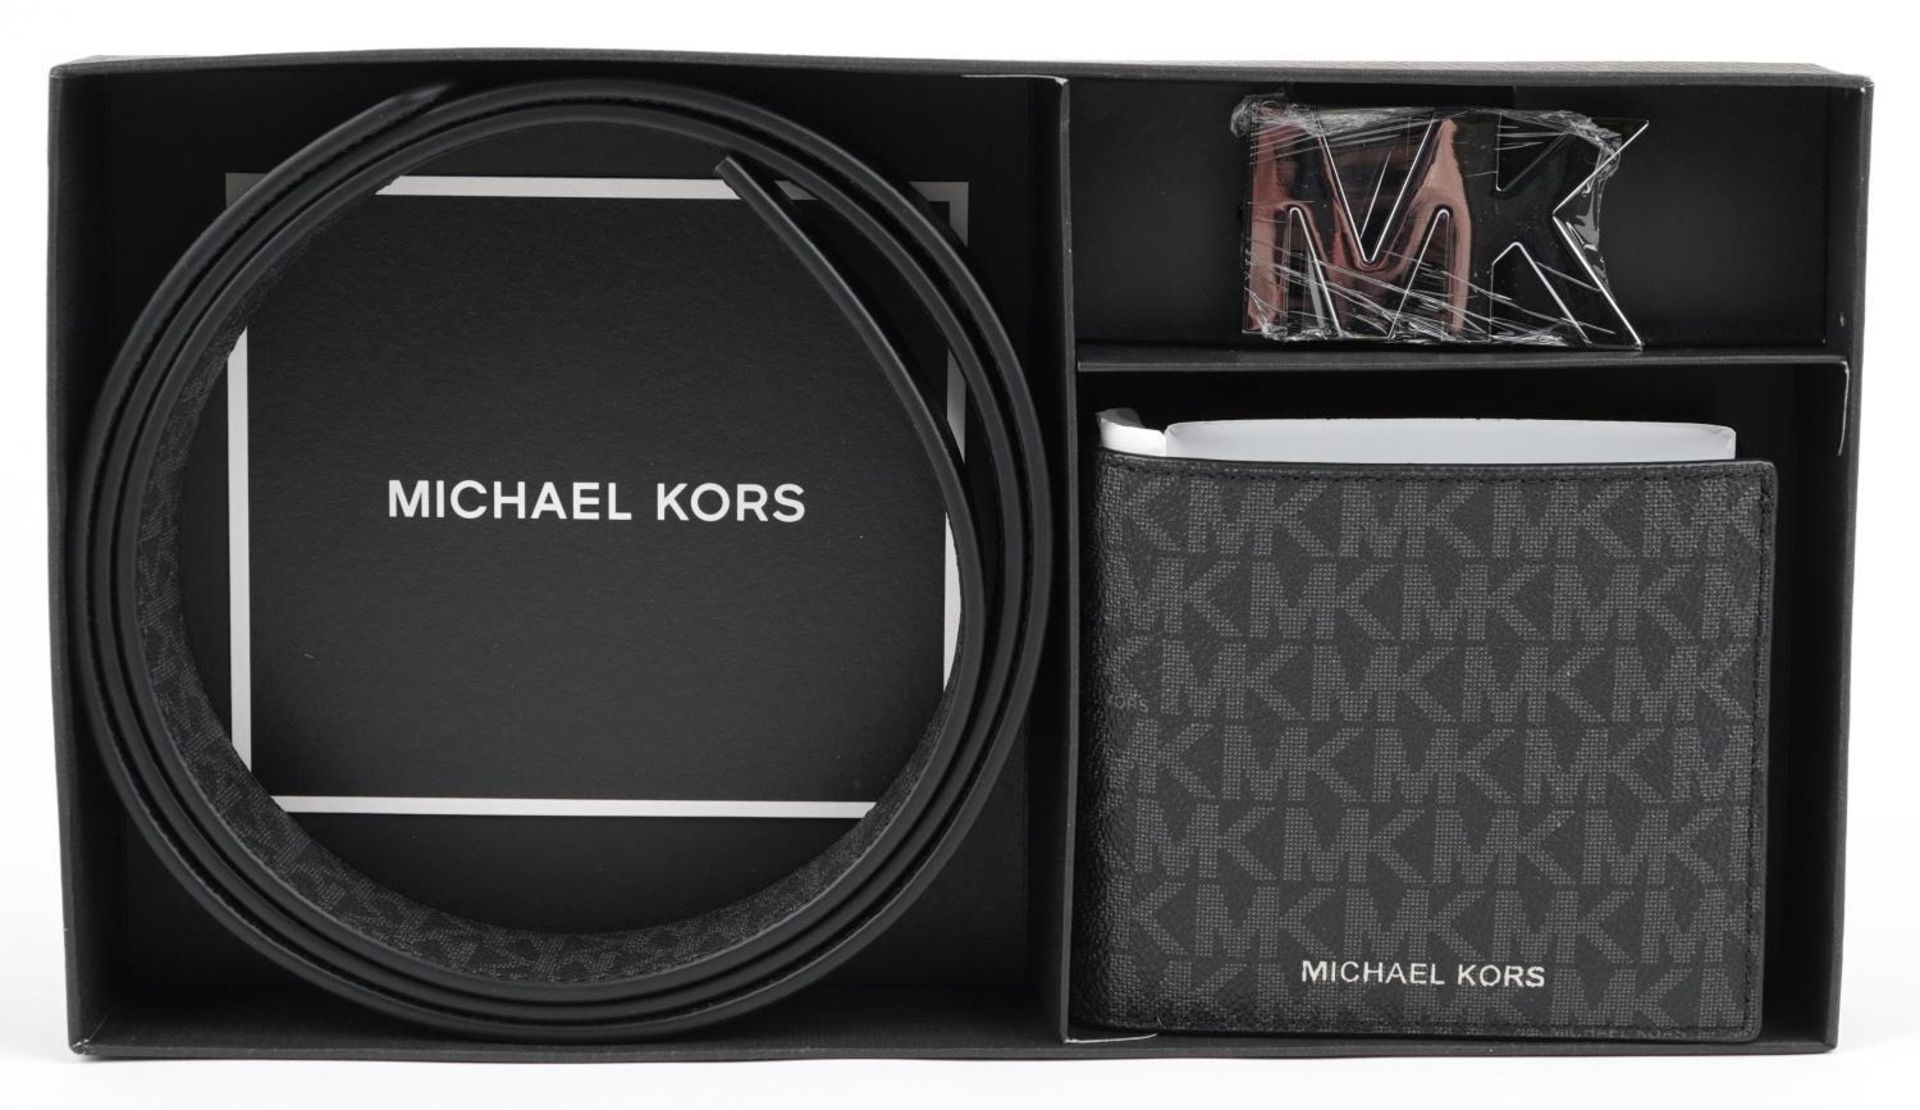 Gentlemen's Michael Kors as new gift set comprising monogrammed leather wallet and belt with box - Image 2 of 3